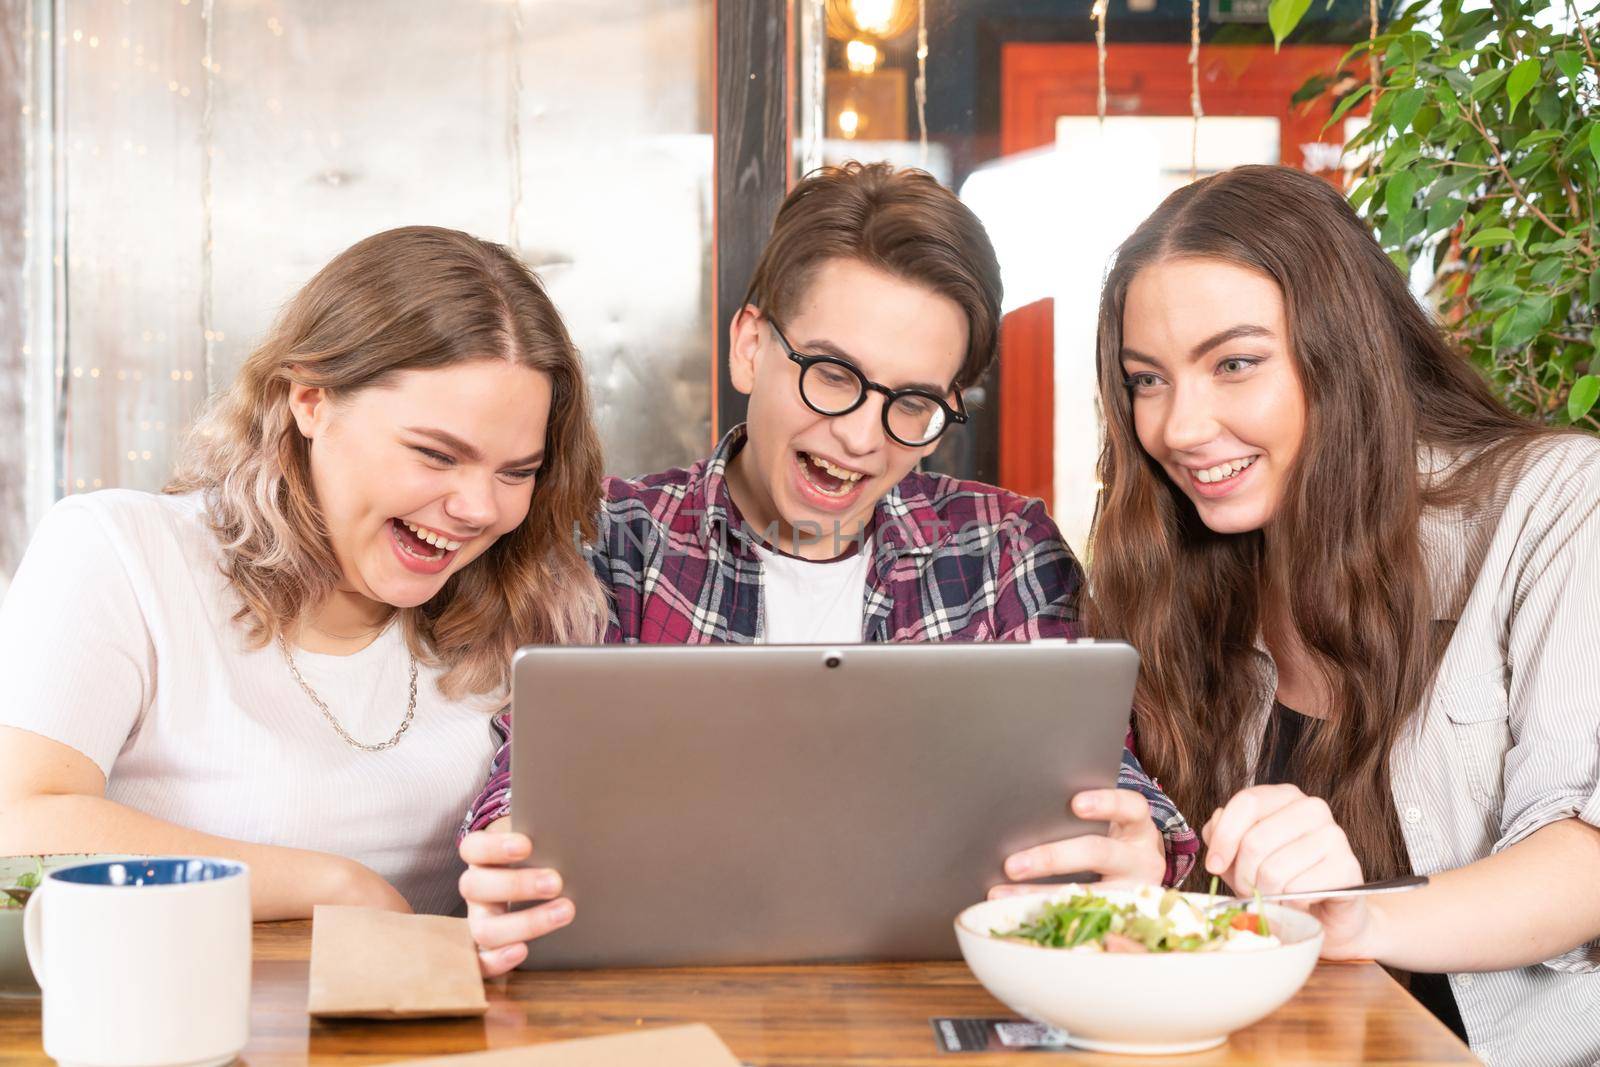 Friends having fun at cafe looking at tablet pc watching fun videos or having video call or social media. Three friends at cafe or street food restaurant spend time together. street food concept.